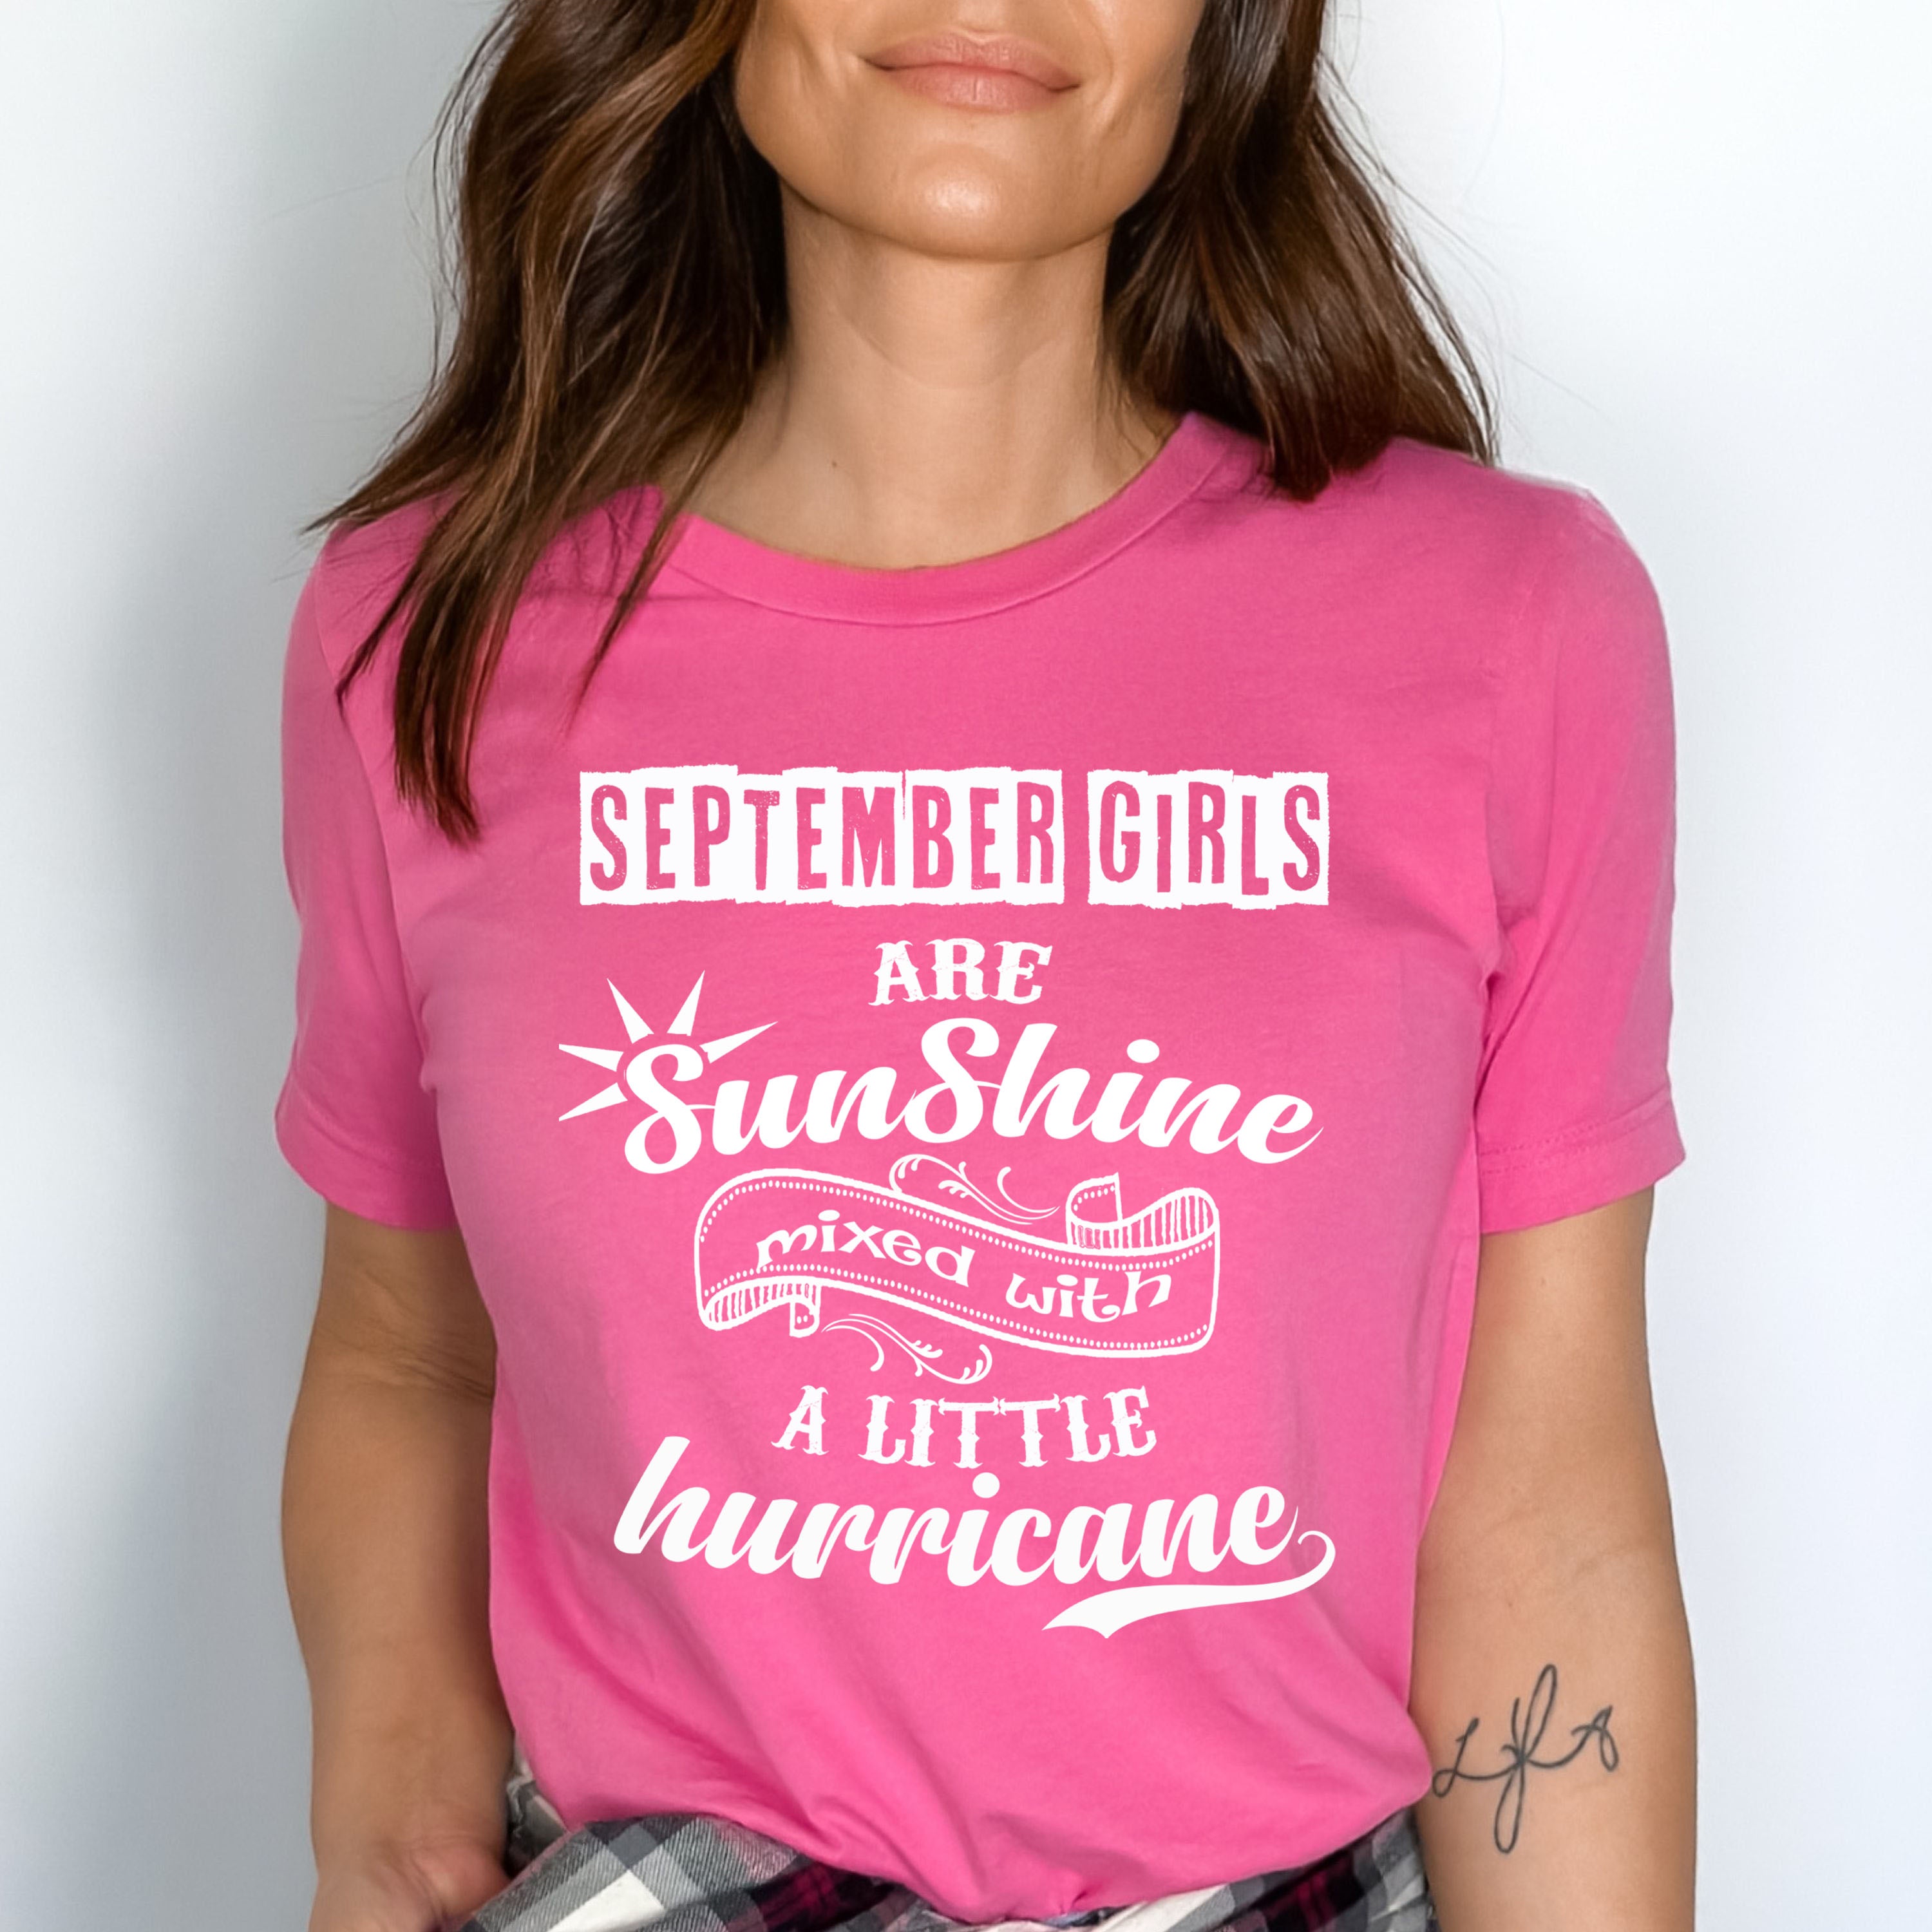 "September Girls Are Sunshine Mixed With Hurricane" Buy All Colors.